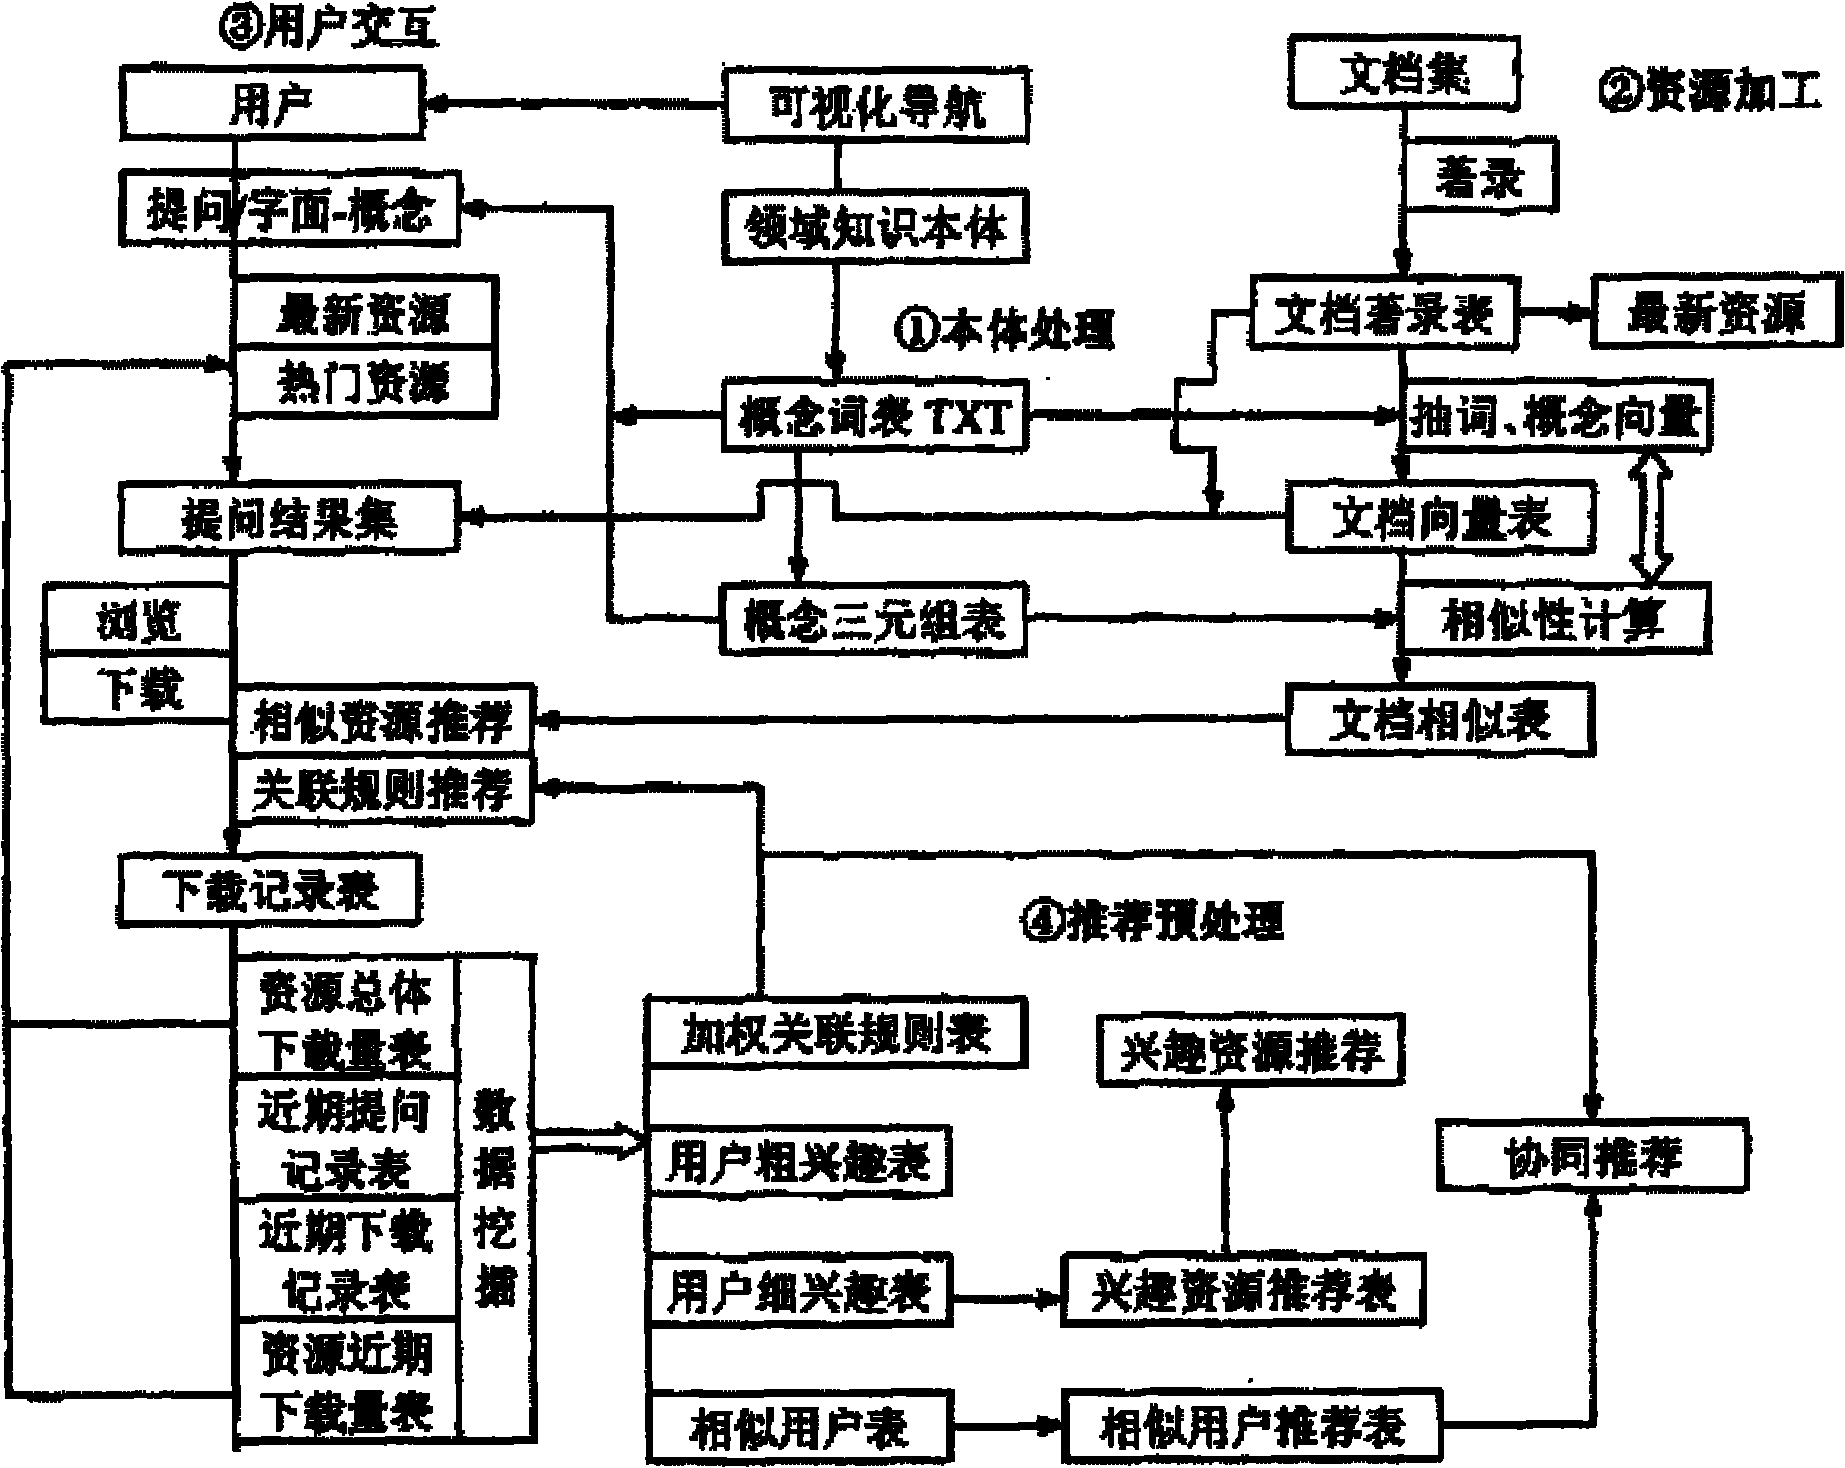 Knowledge-service-oriented recommendation method